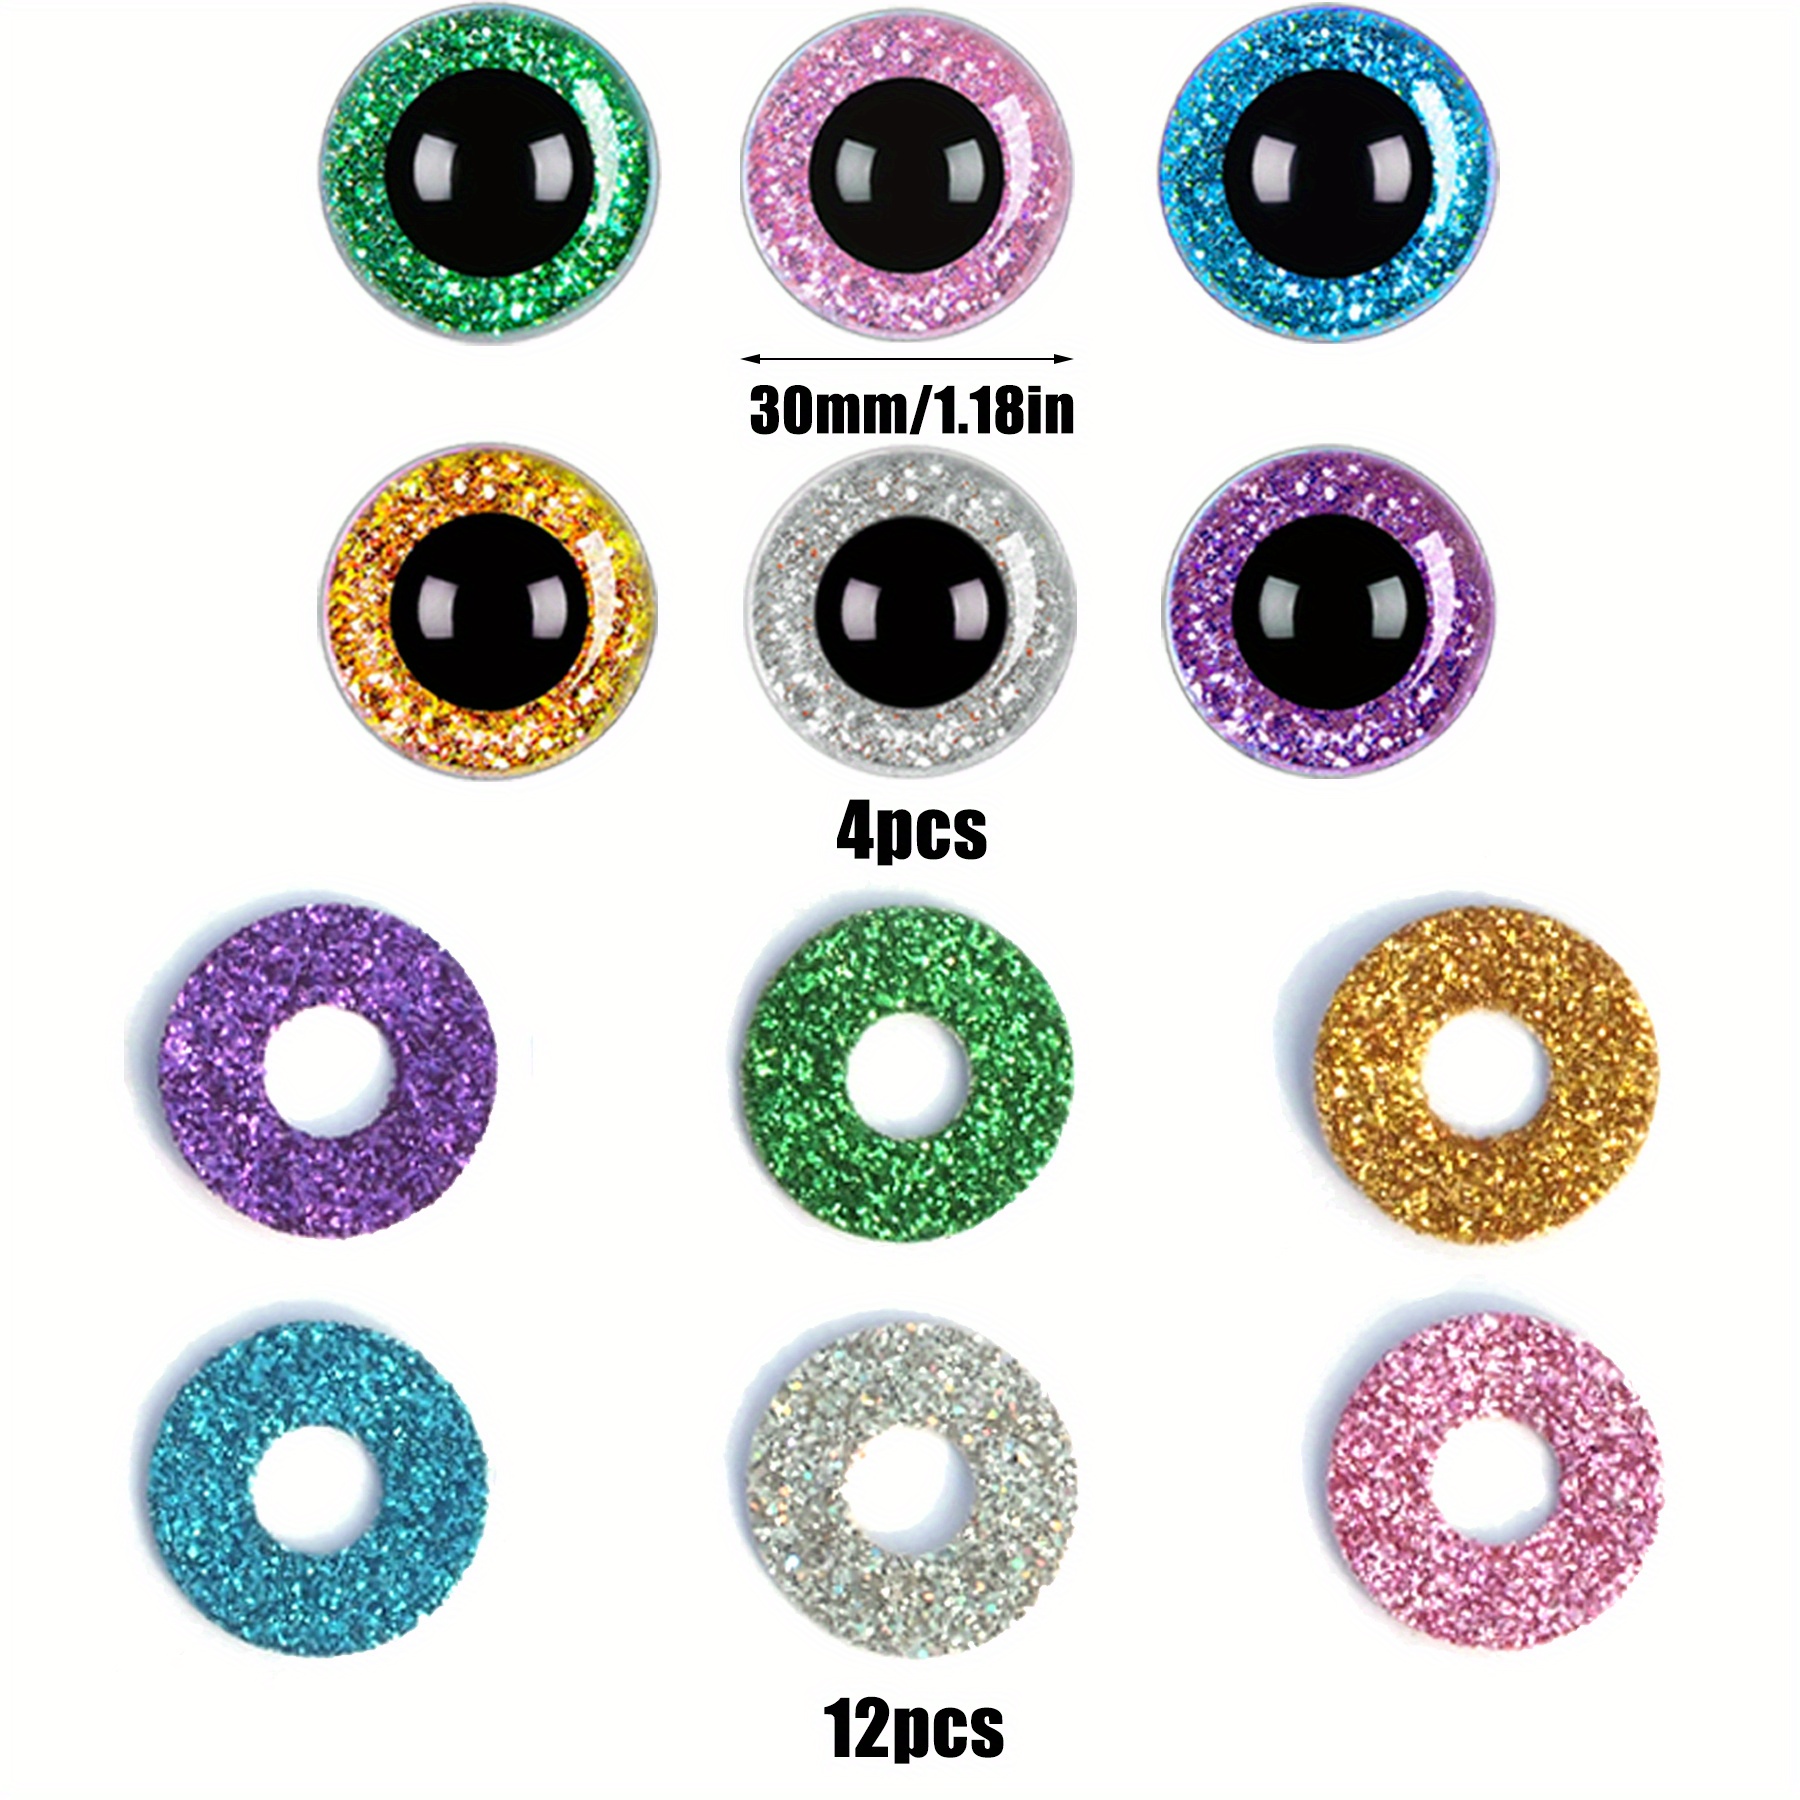 100 Pieces Large Safety Eyes for Amigurumi Stuffed Glitter Animal Eyes  Plastic Craft Crochet Eyes for DIY of Puppet Bear Crafts Toy Doll Making